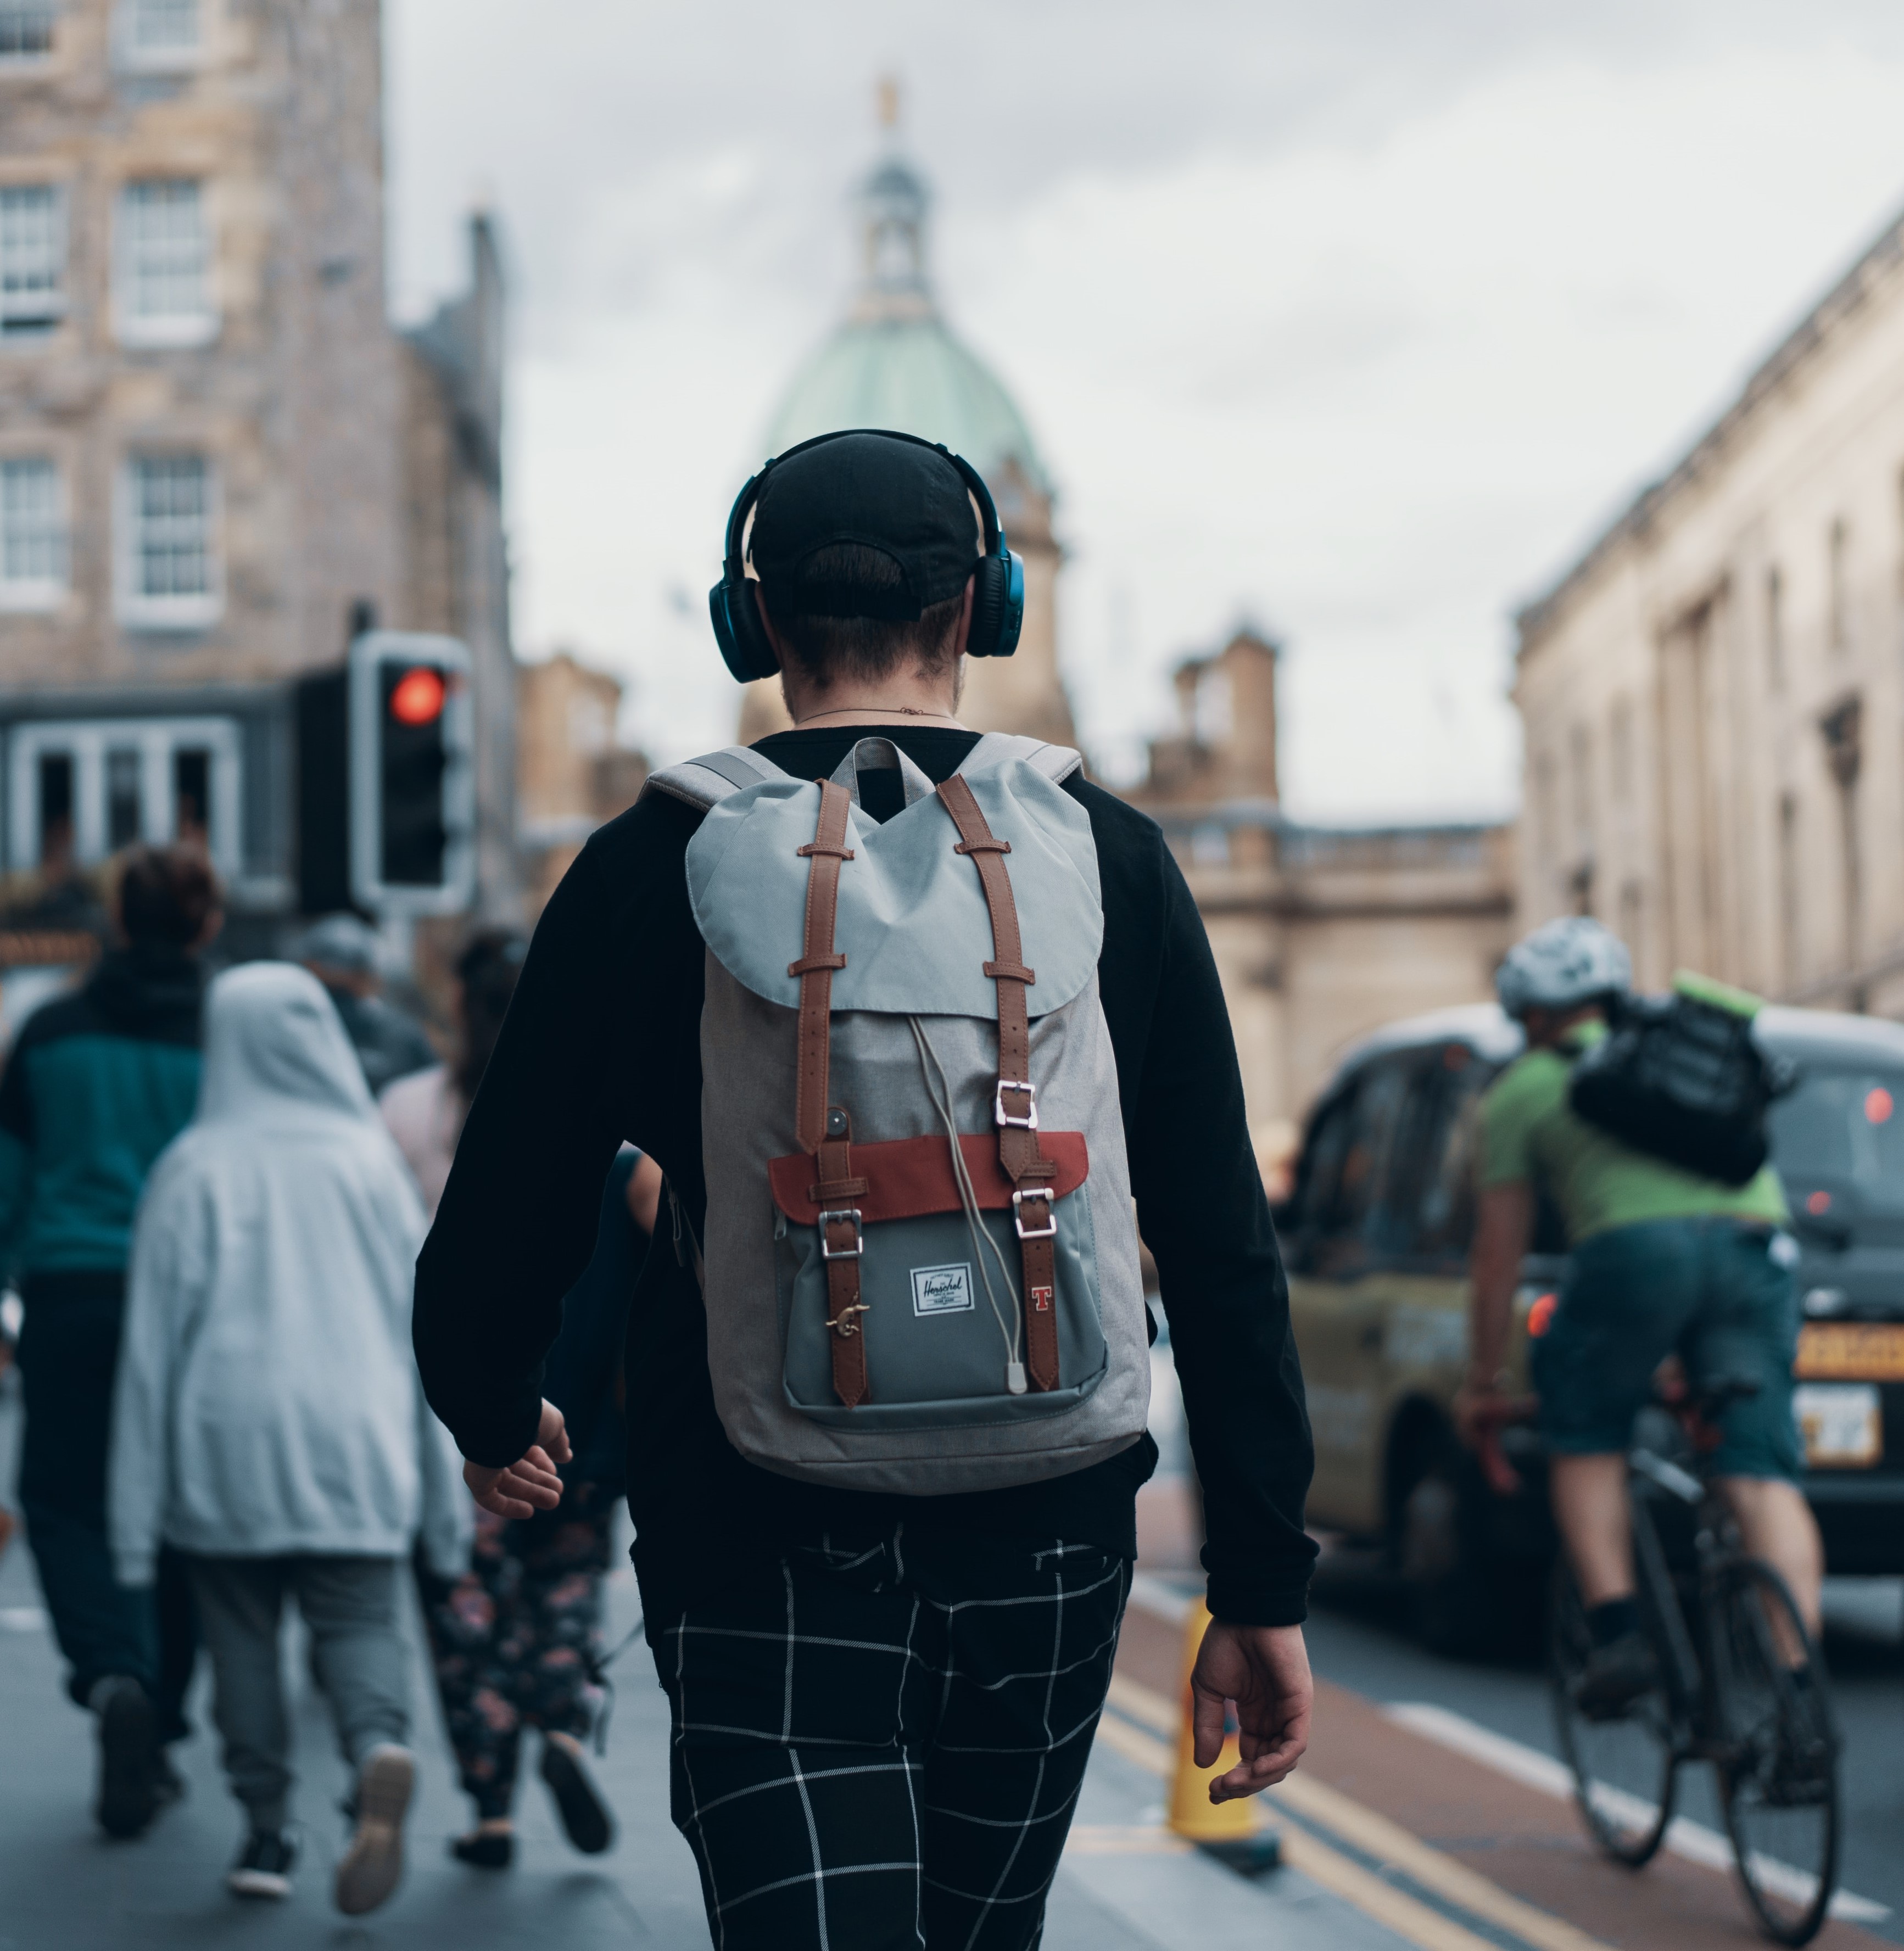 Image of man walking with headphones on in the city